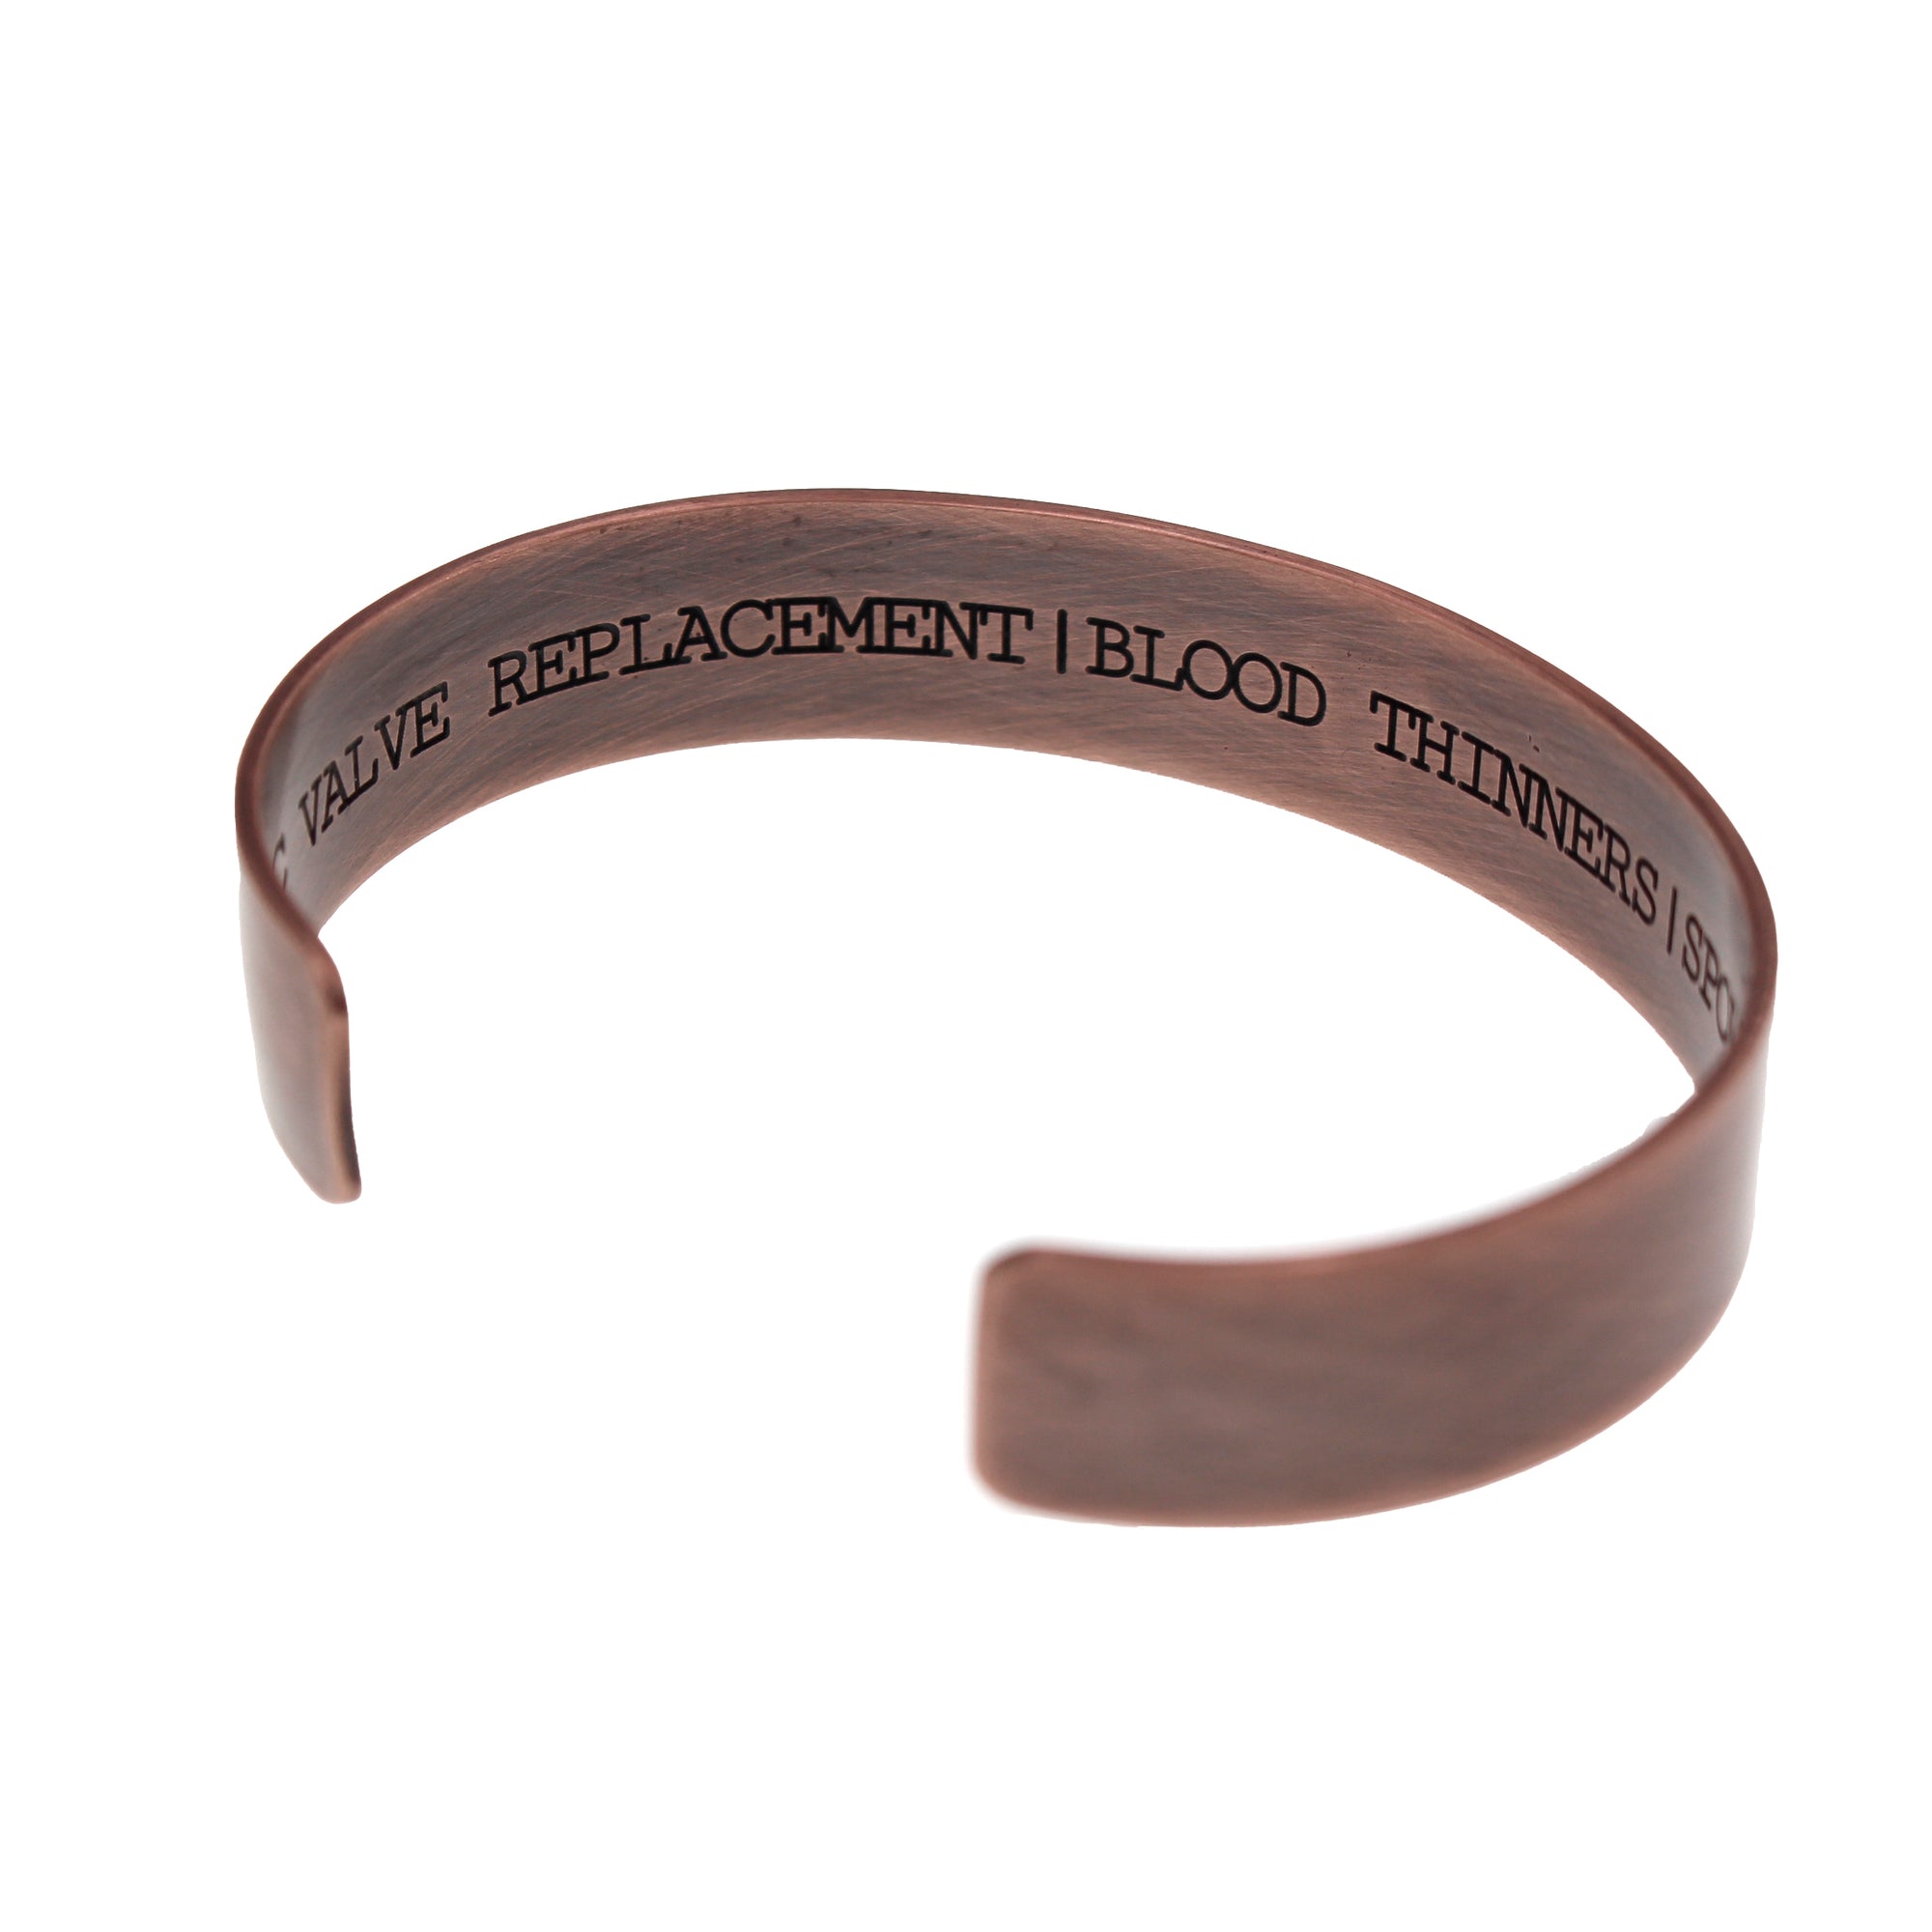 Rustic Style Copper Medical Alter Cuff - 1/2" - Love It Personalized